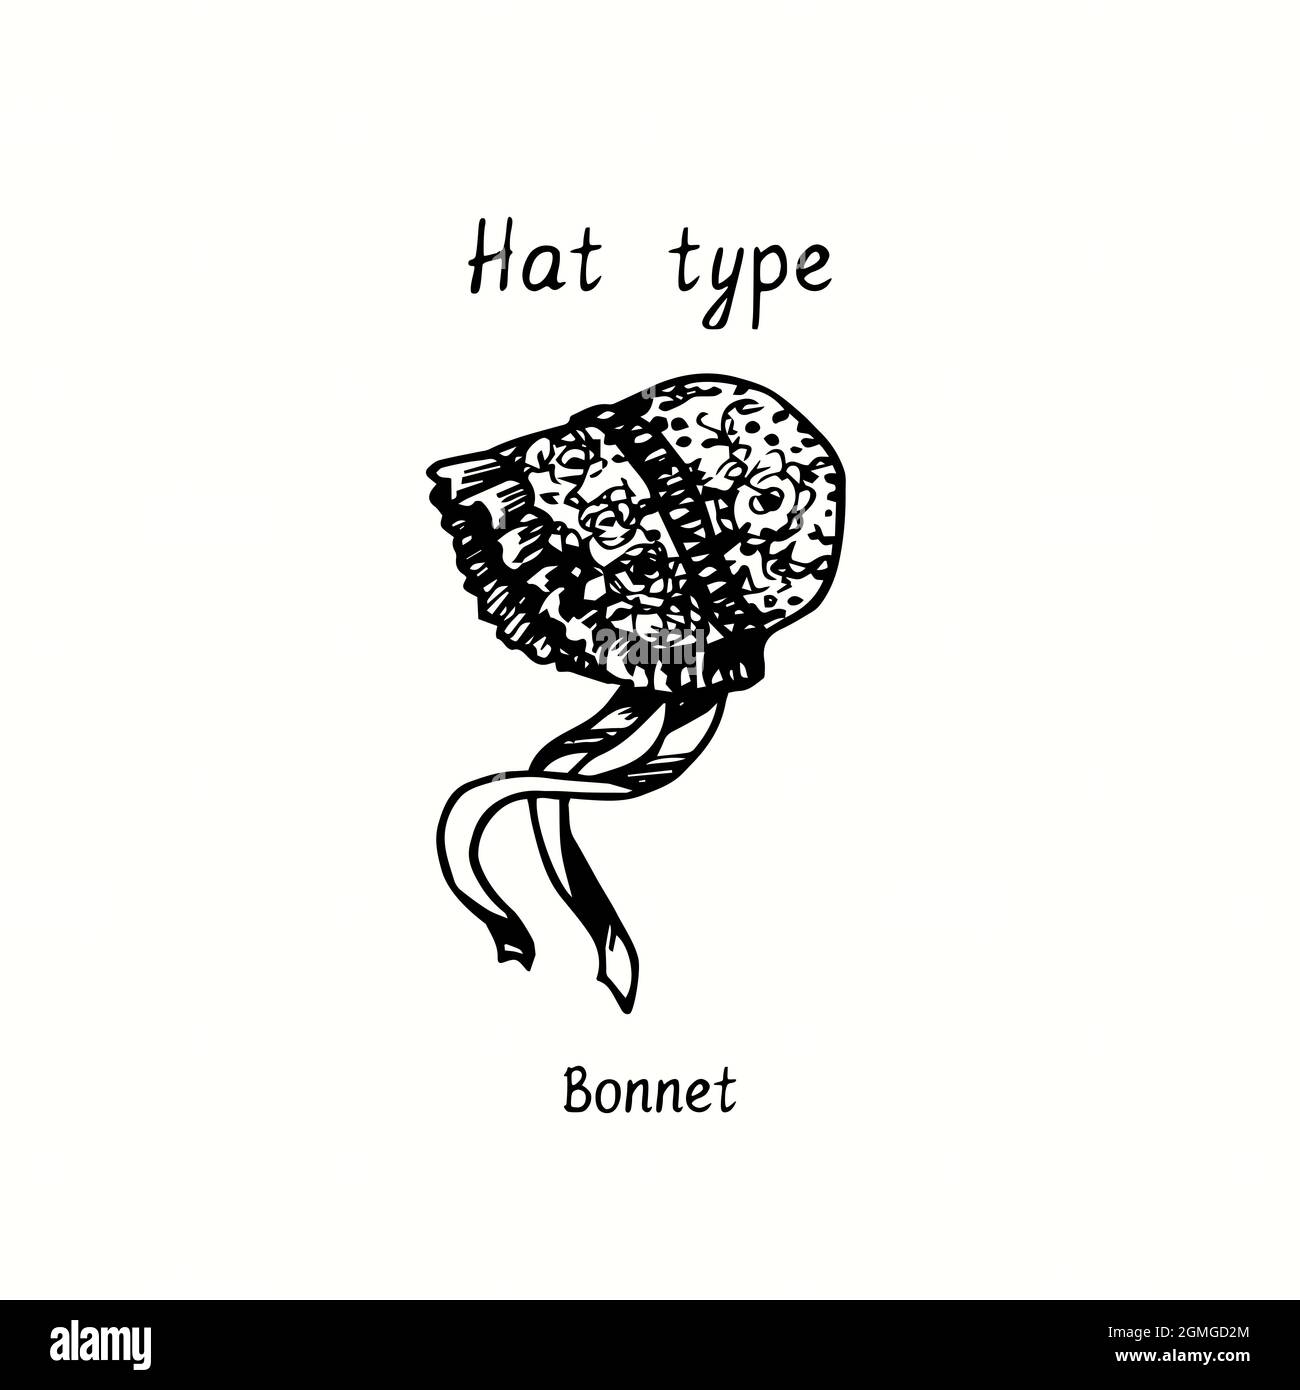 Hat type, Bonnet. Ink black and white drawing outline illustration Stock  Photo - Alamy